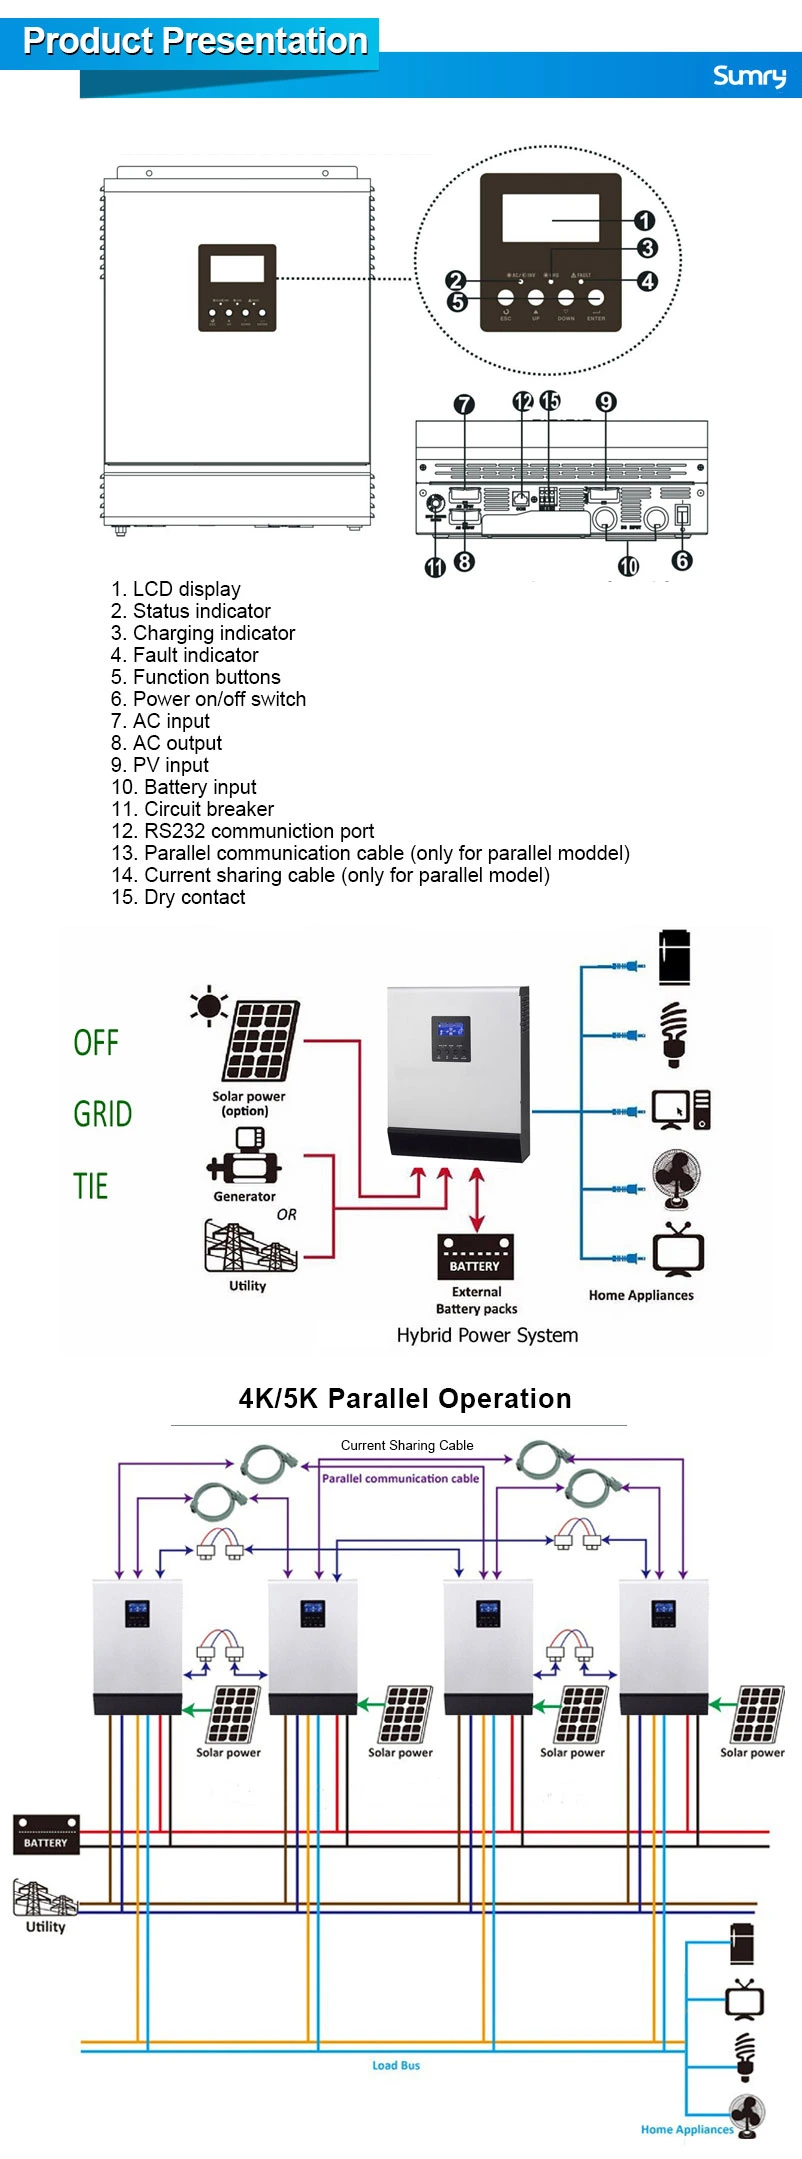 3kVA 24VDC 120VAC 220VAC off Grid High Frequency Solar Inverter with AC Charger and MPPT Charger